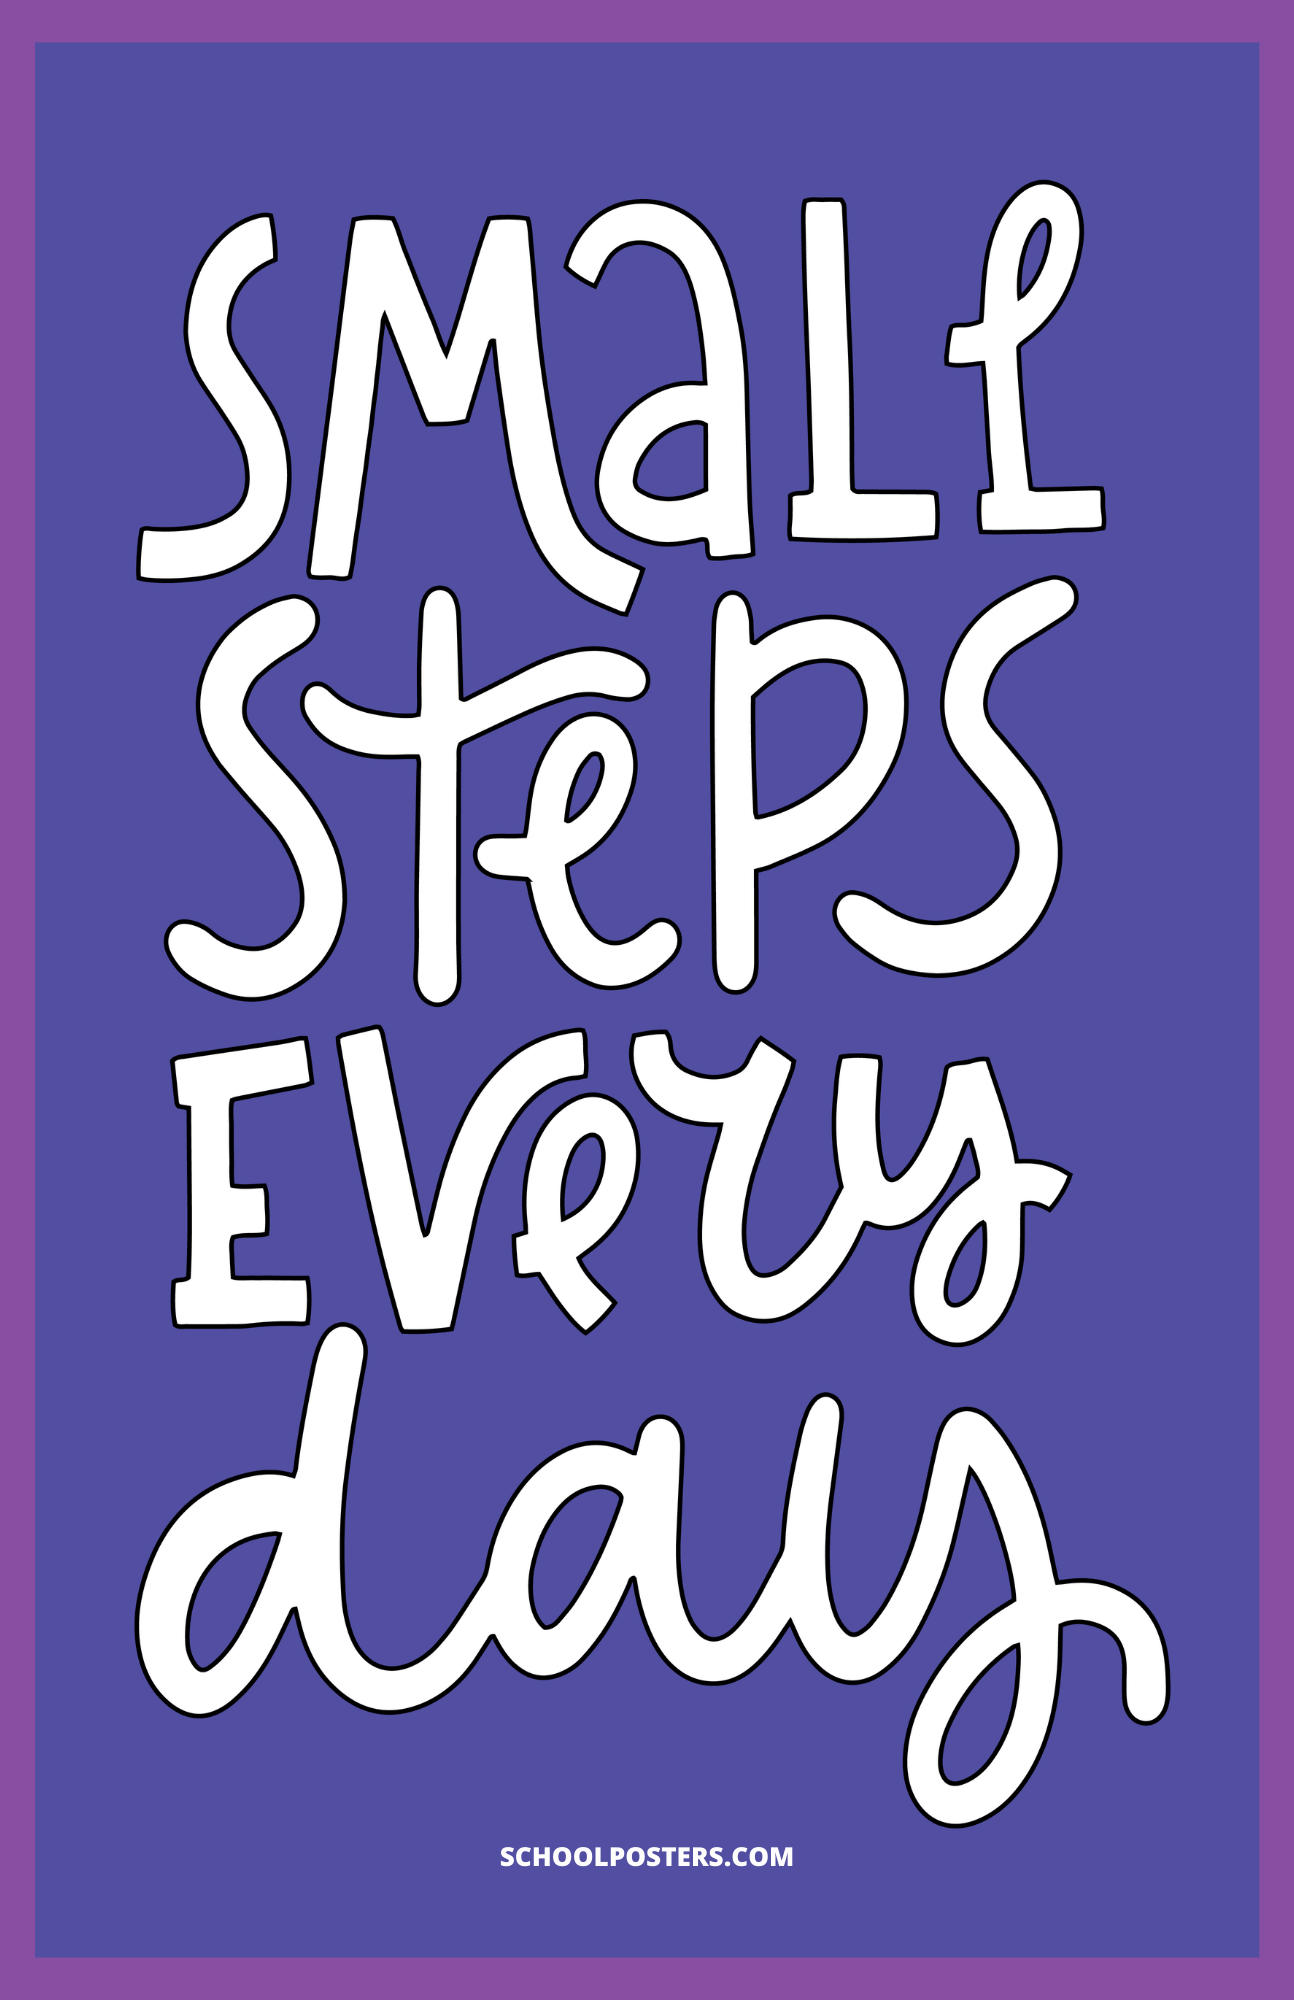 Small Steps Every Day Poster